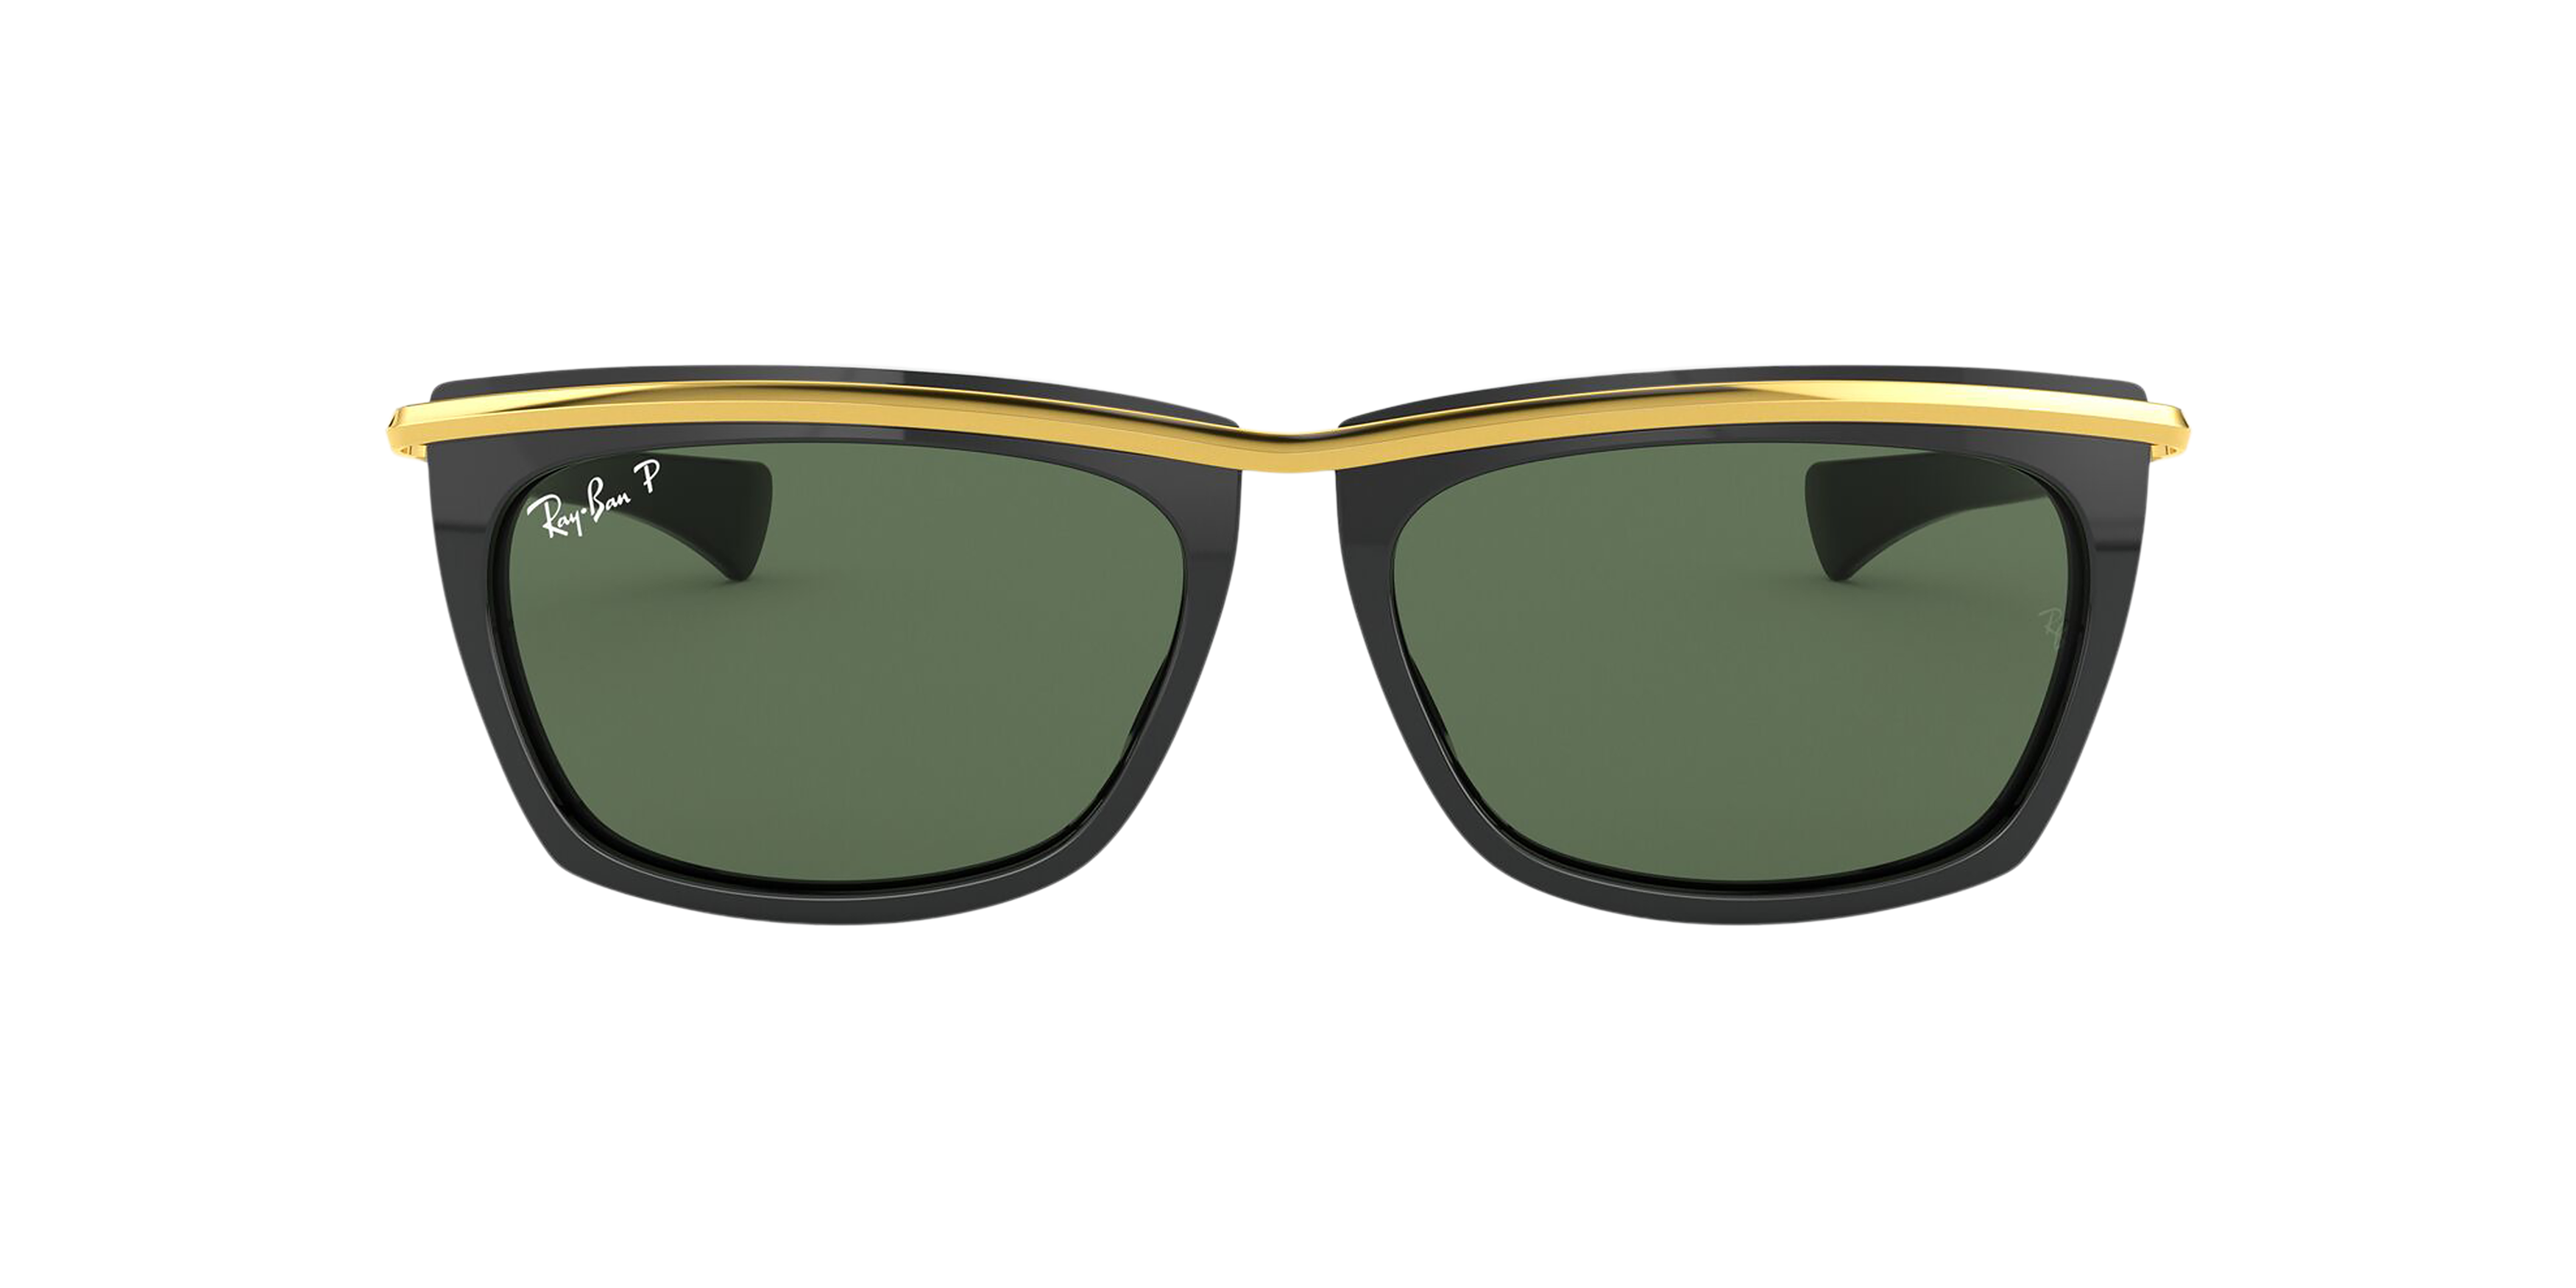 [products.image.front] Ray-Ban Olympian II RB2419 130358